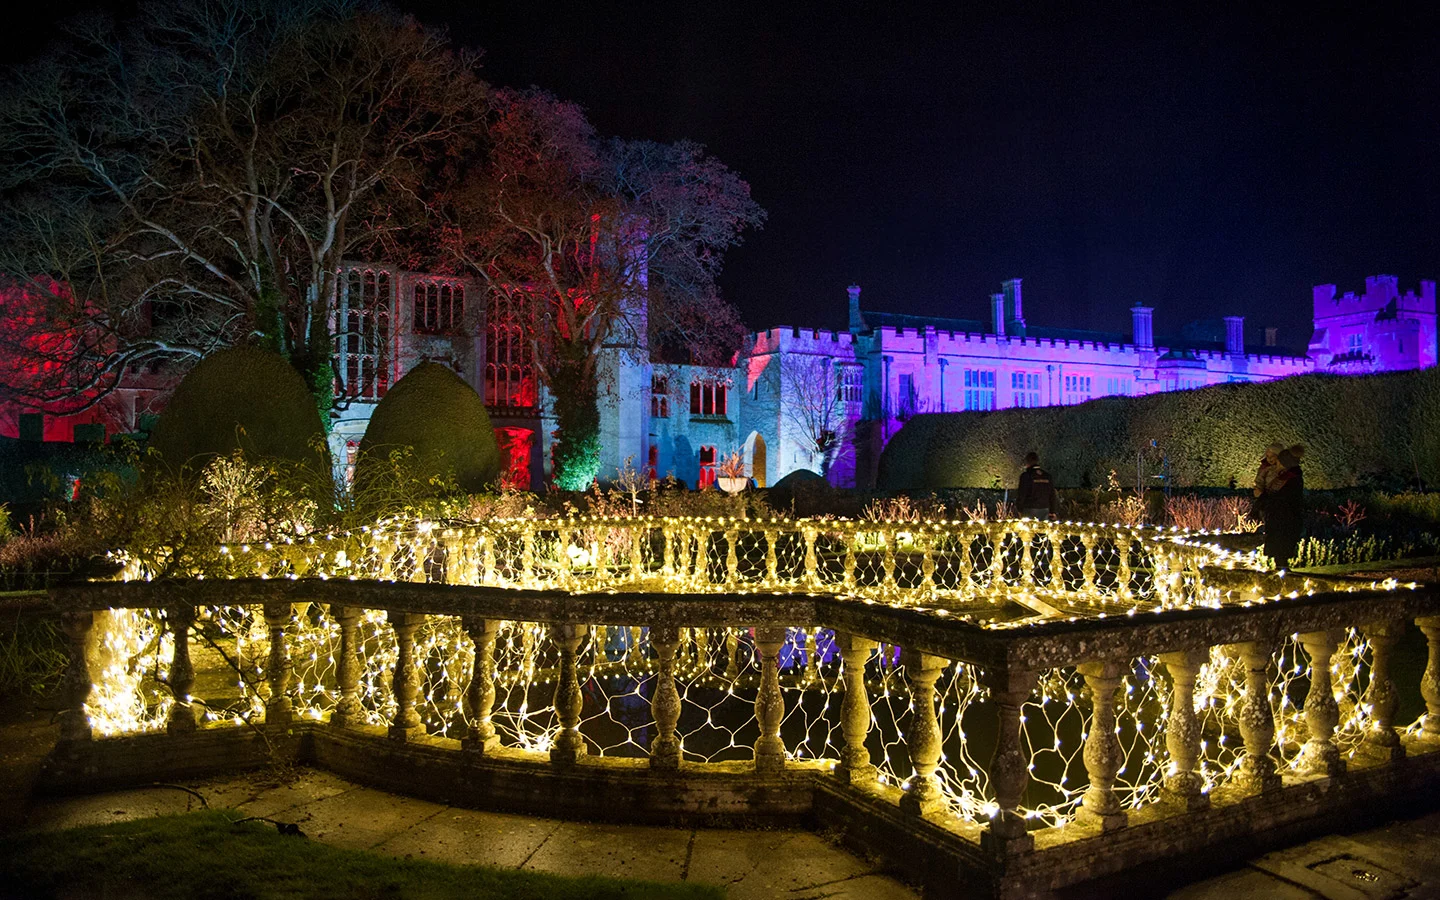 Winter in the Cotswolds: The Spectacle of Light at Sudeley Castle